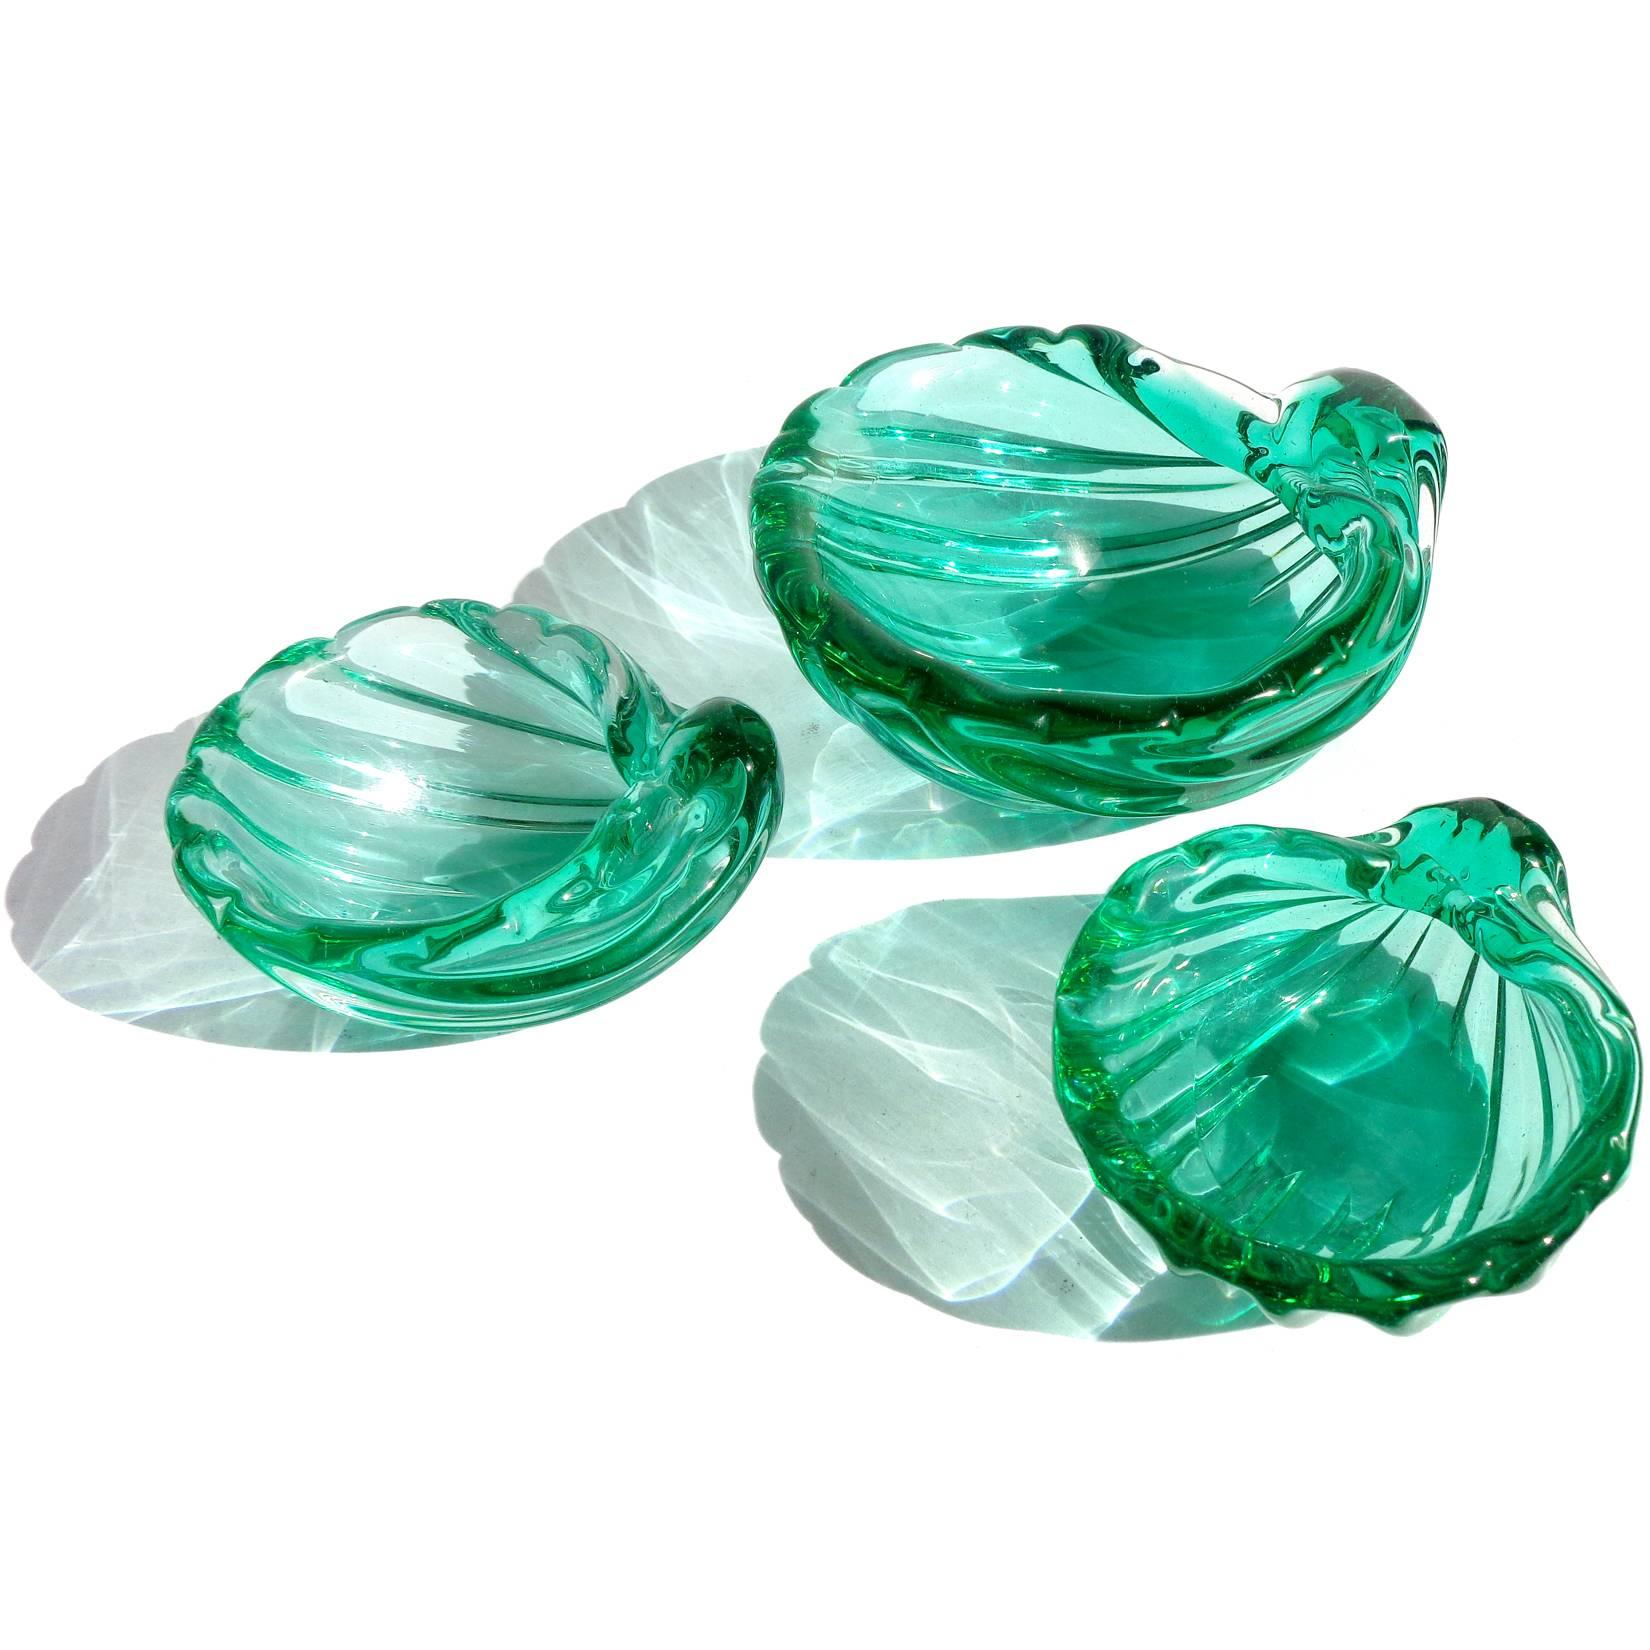 Beautiful set of three vintage Murano hand blown Sommerso green Italian art glass sculptural seashell ring dishes / master salt set. Documented to designer Archimede Seguso. Would make a great display on any desk, vanity or coffee table. Use them as